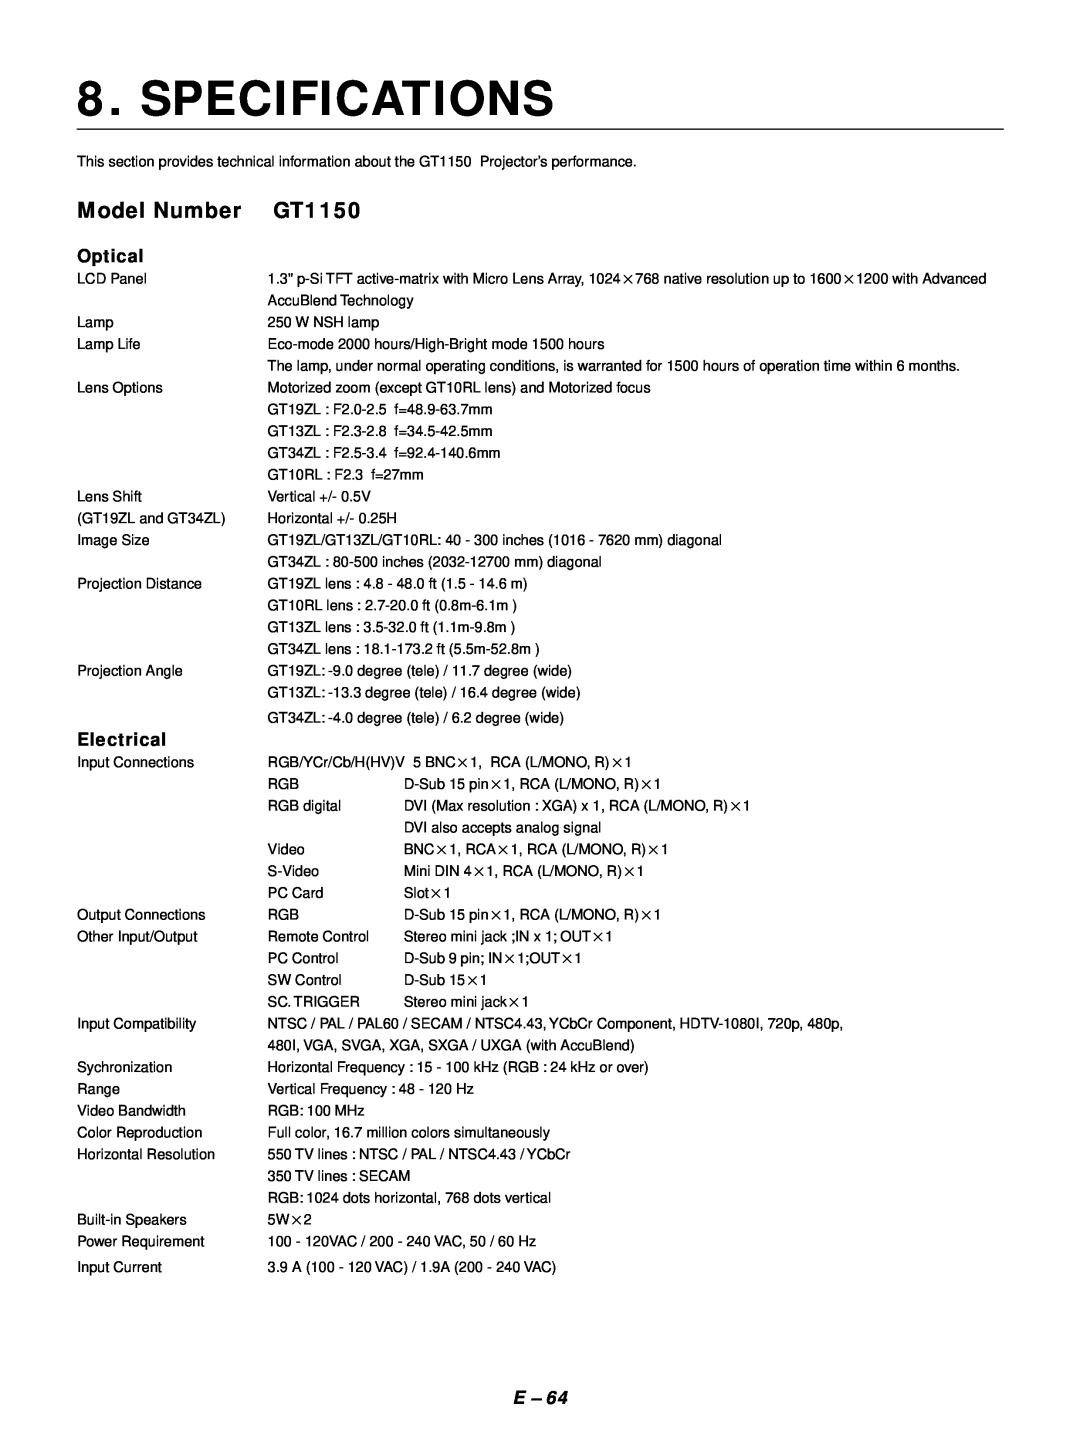 NEC GT1150 user manual Specifications, Model Number, Optical, Electrical 